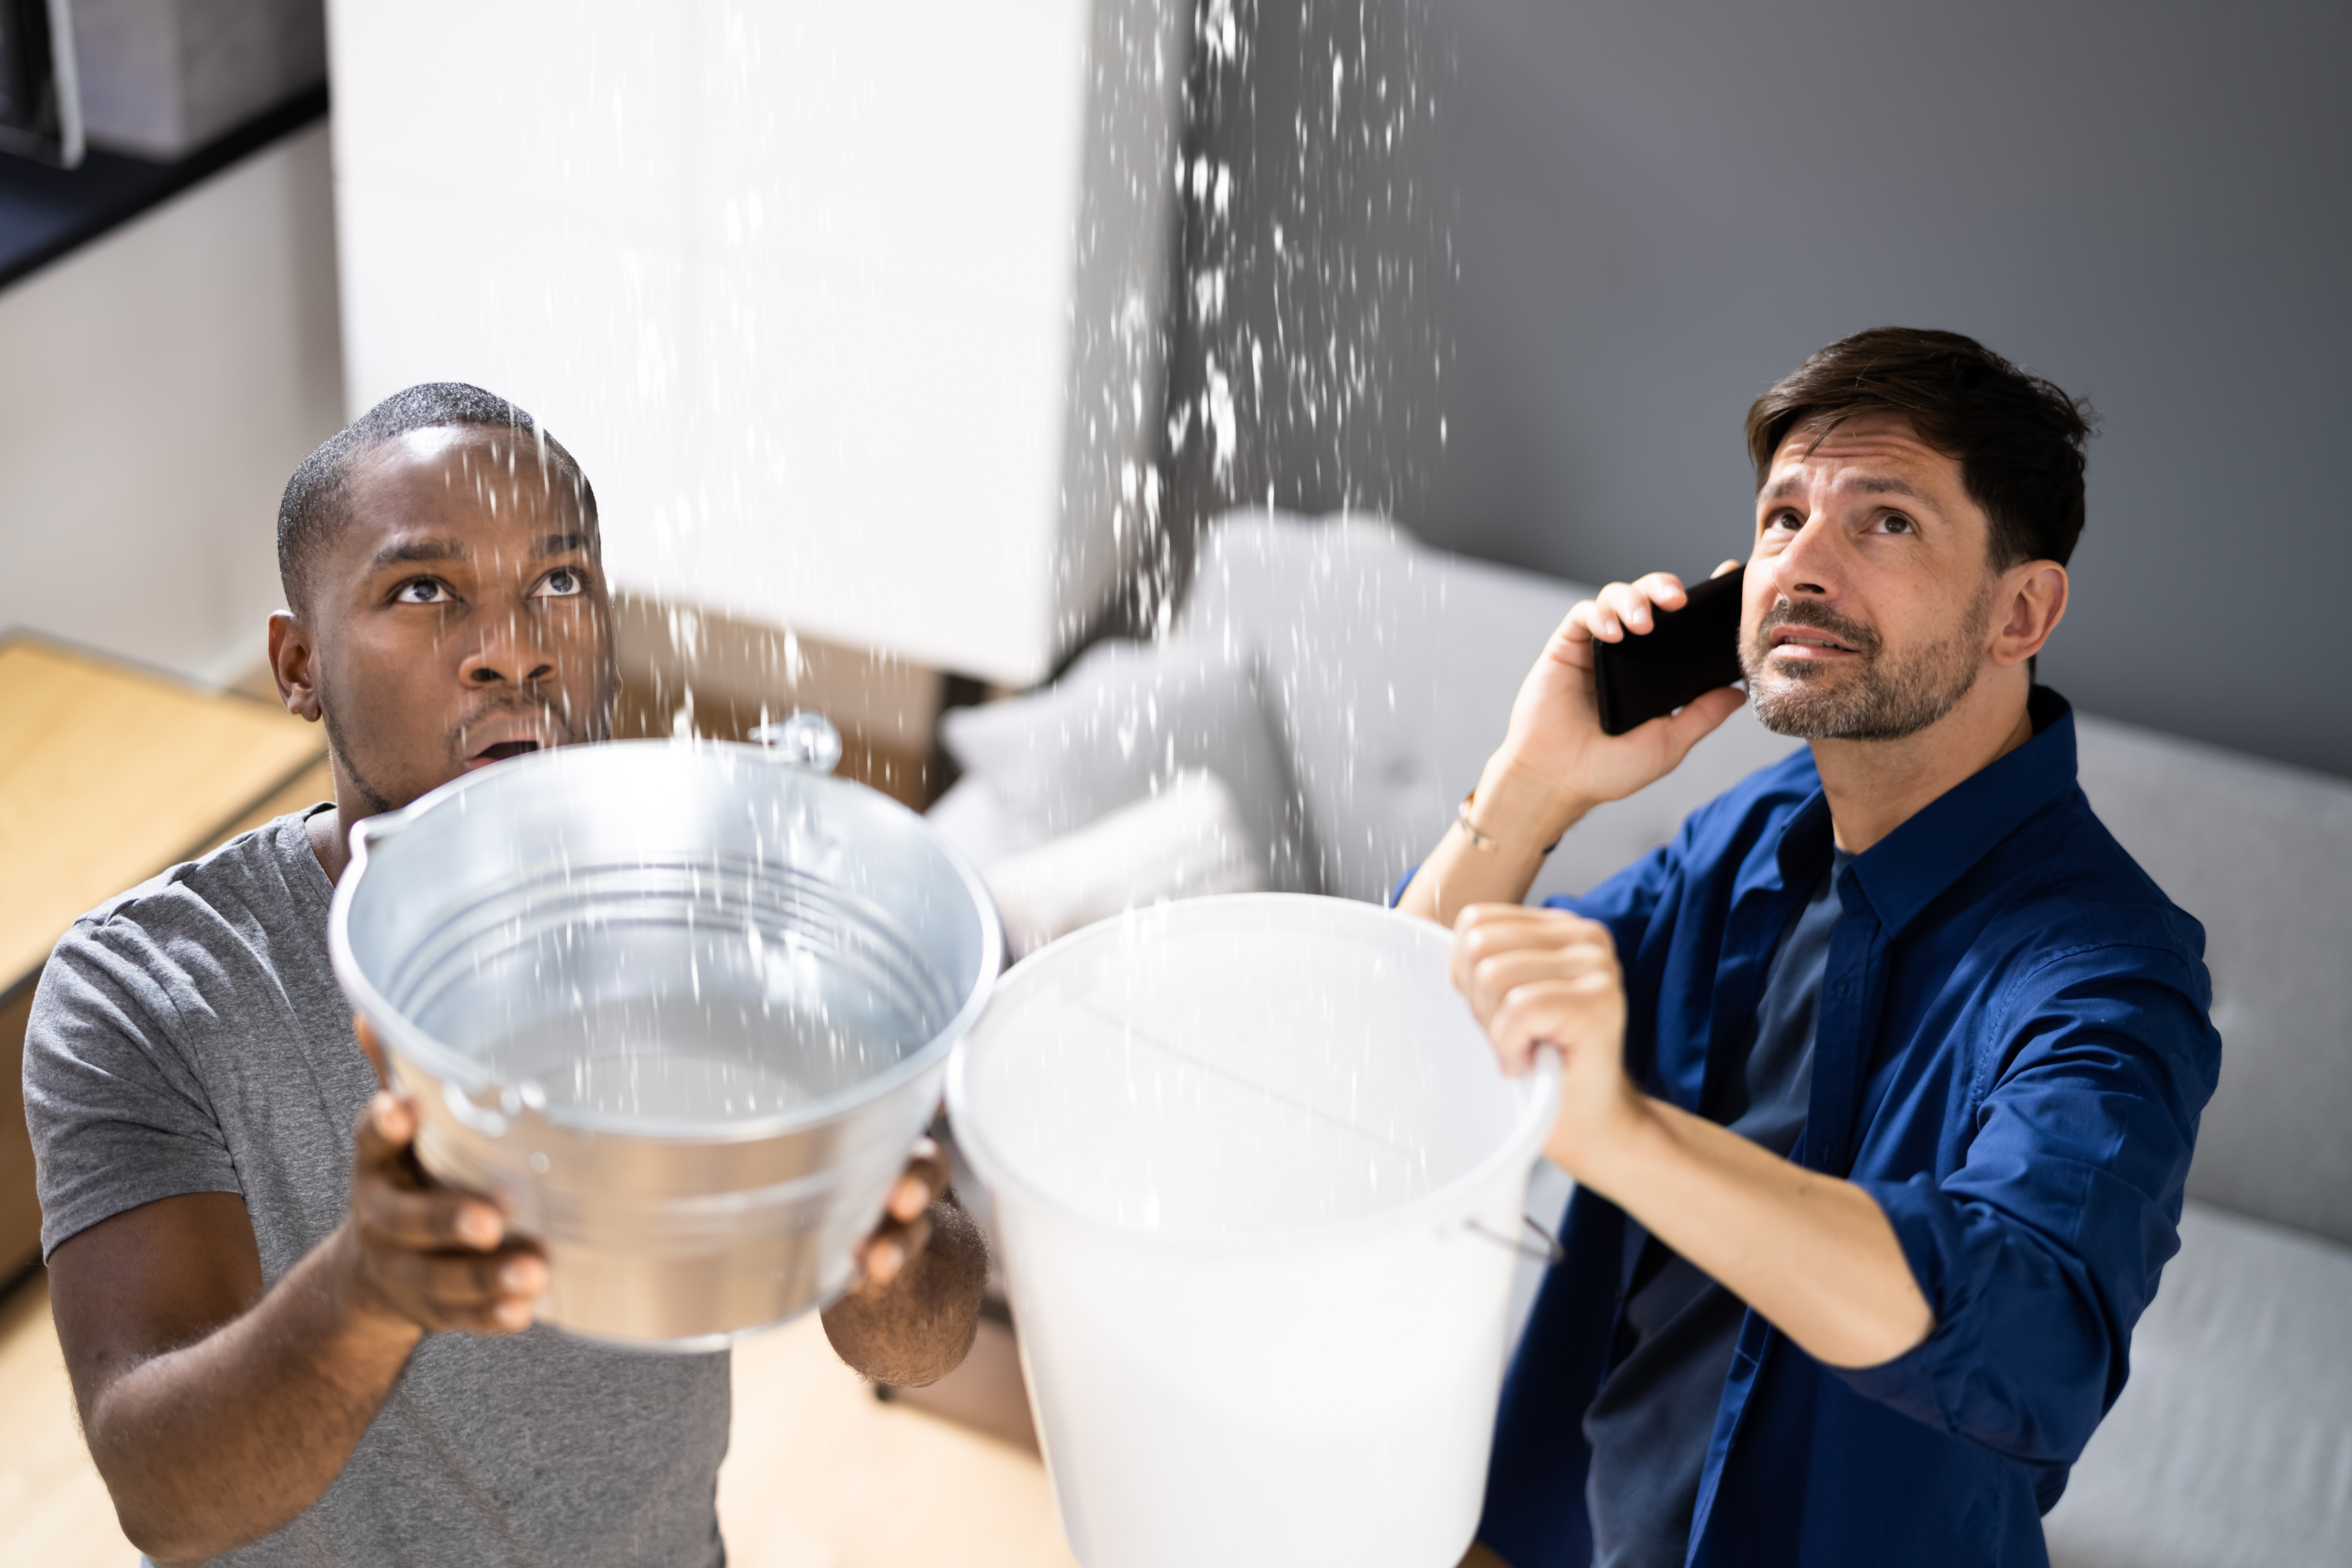 Plumber Needed For Leaking Roof | Plumber Services